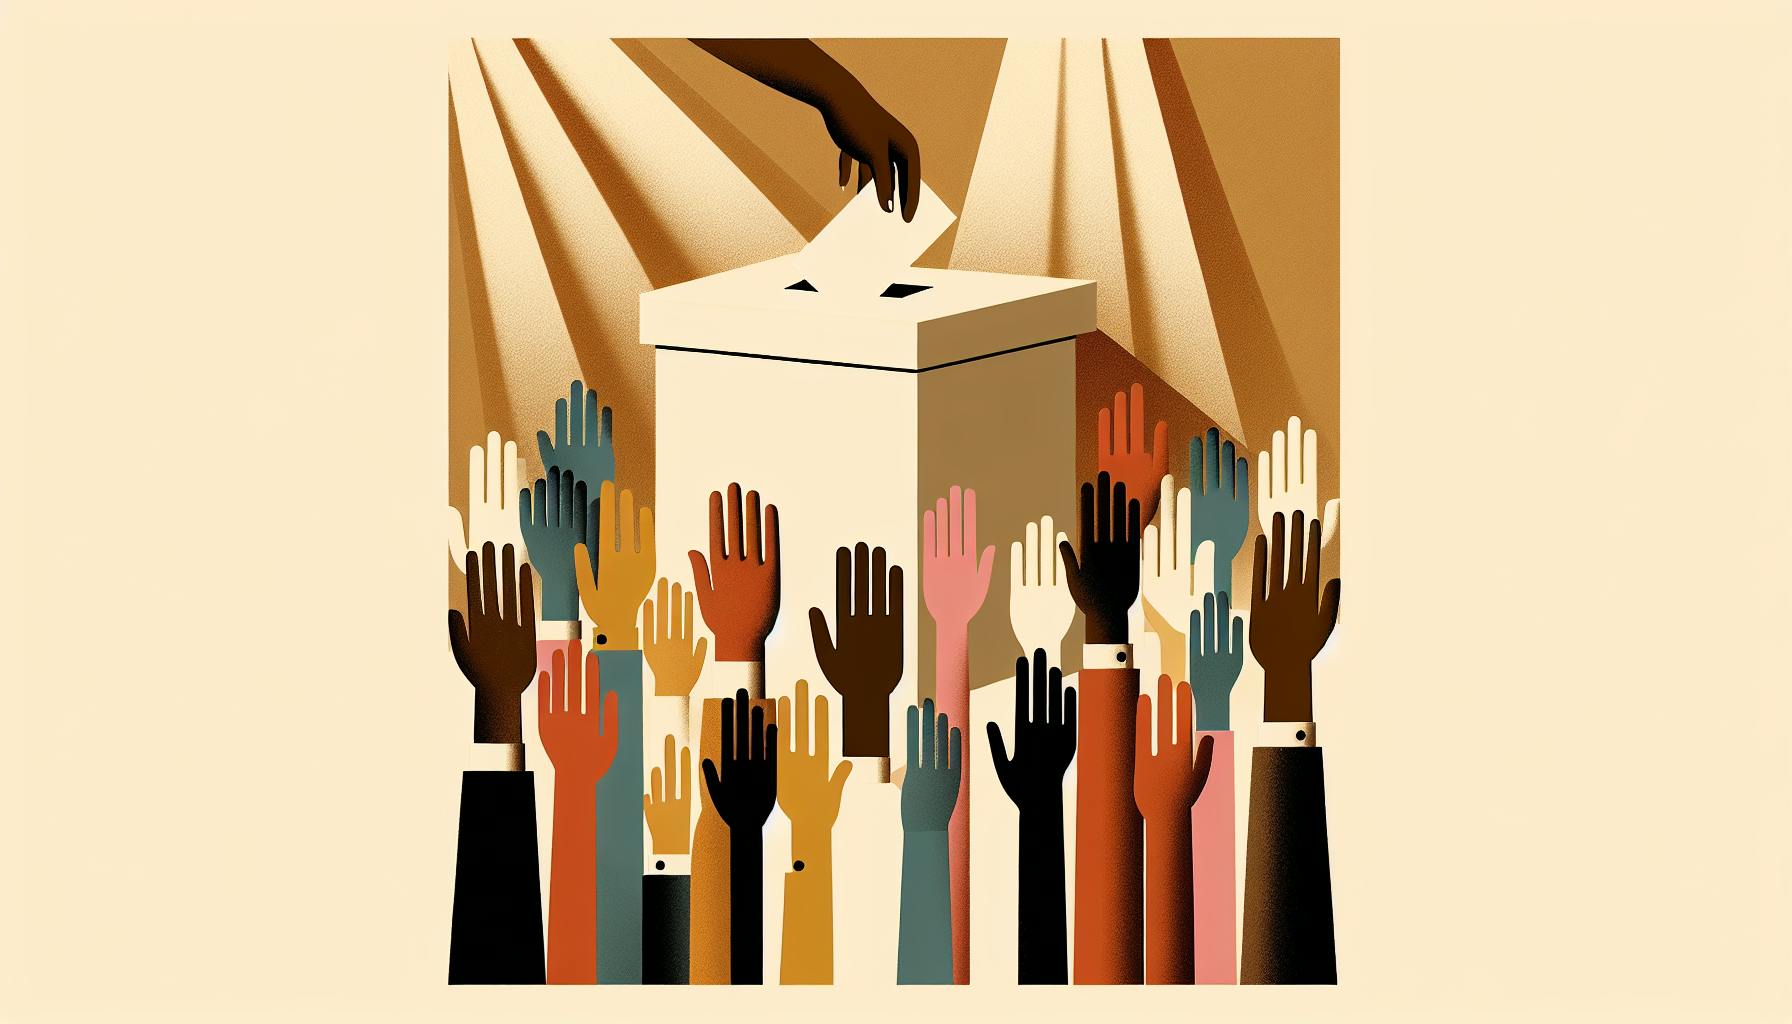 The Fifteenth Amendment: Right to Vote - Race, Color, Servitude